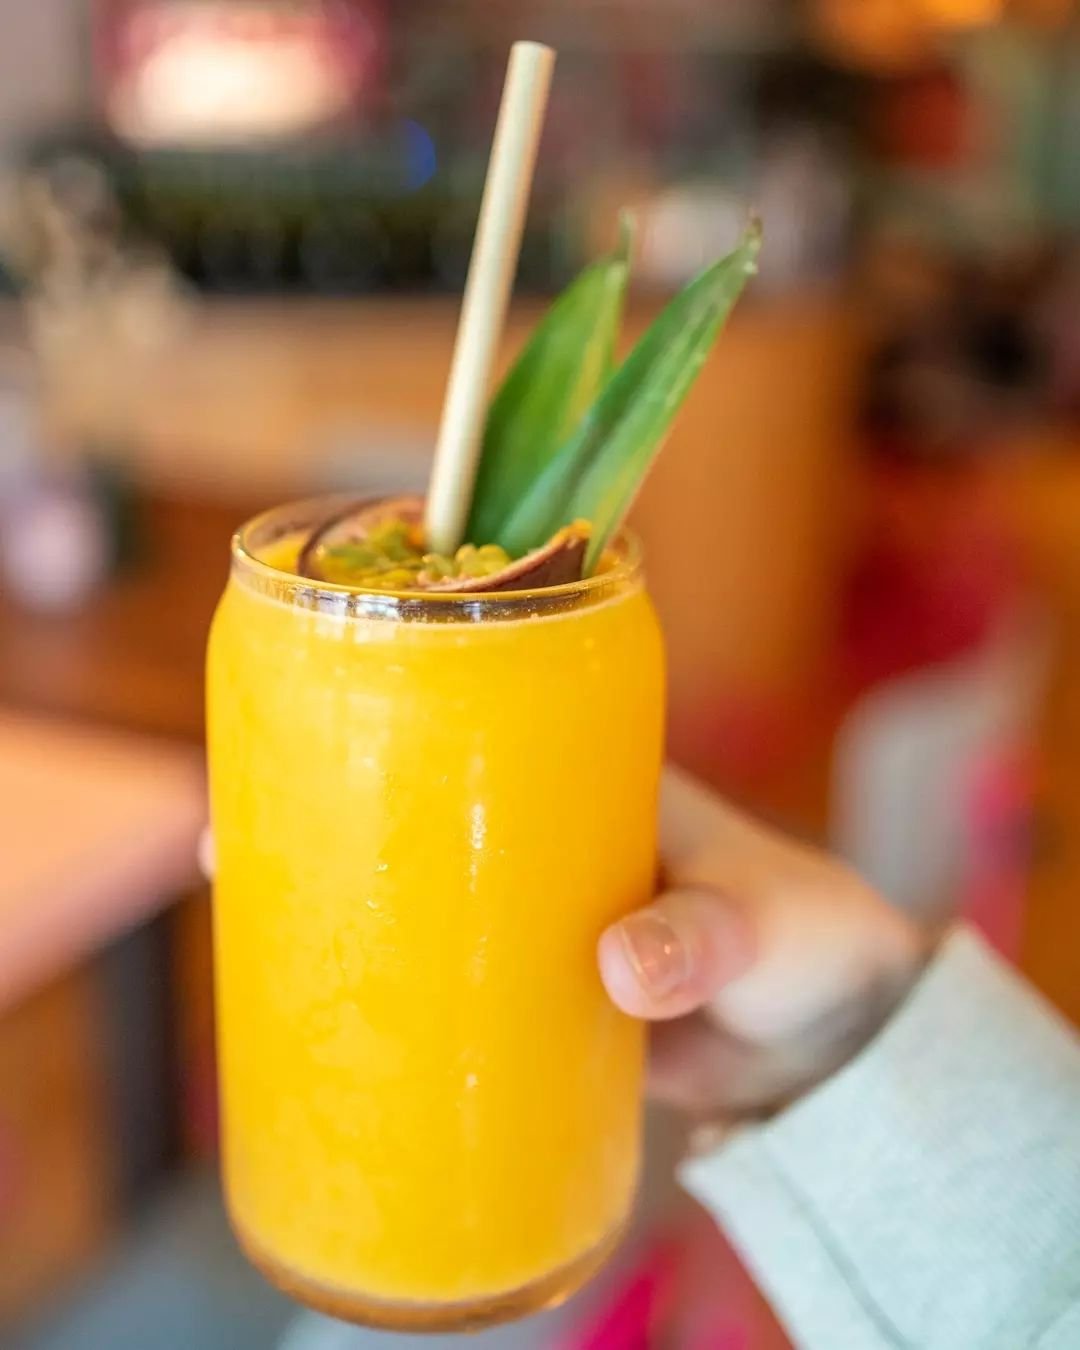 Get ready to ride the tropical wave at Veganees! 🌴🍹 When the weather heats up, our drinks get cooler. Enjoy our refreshing tropical smoothie with mango, papaya, and pineapple. ☀️